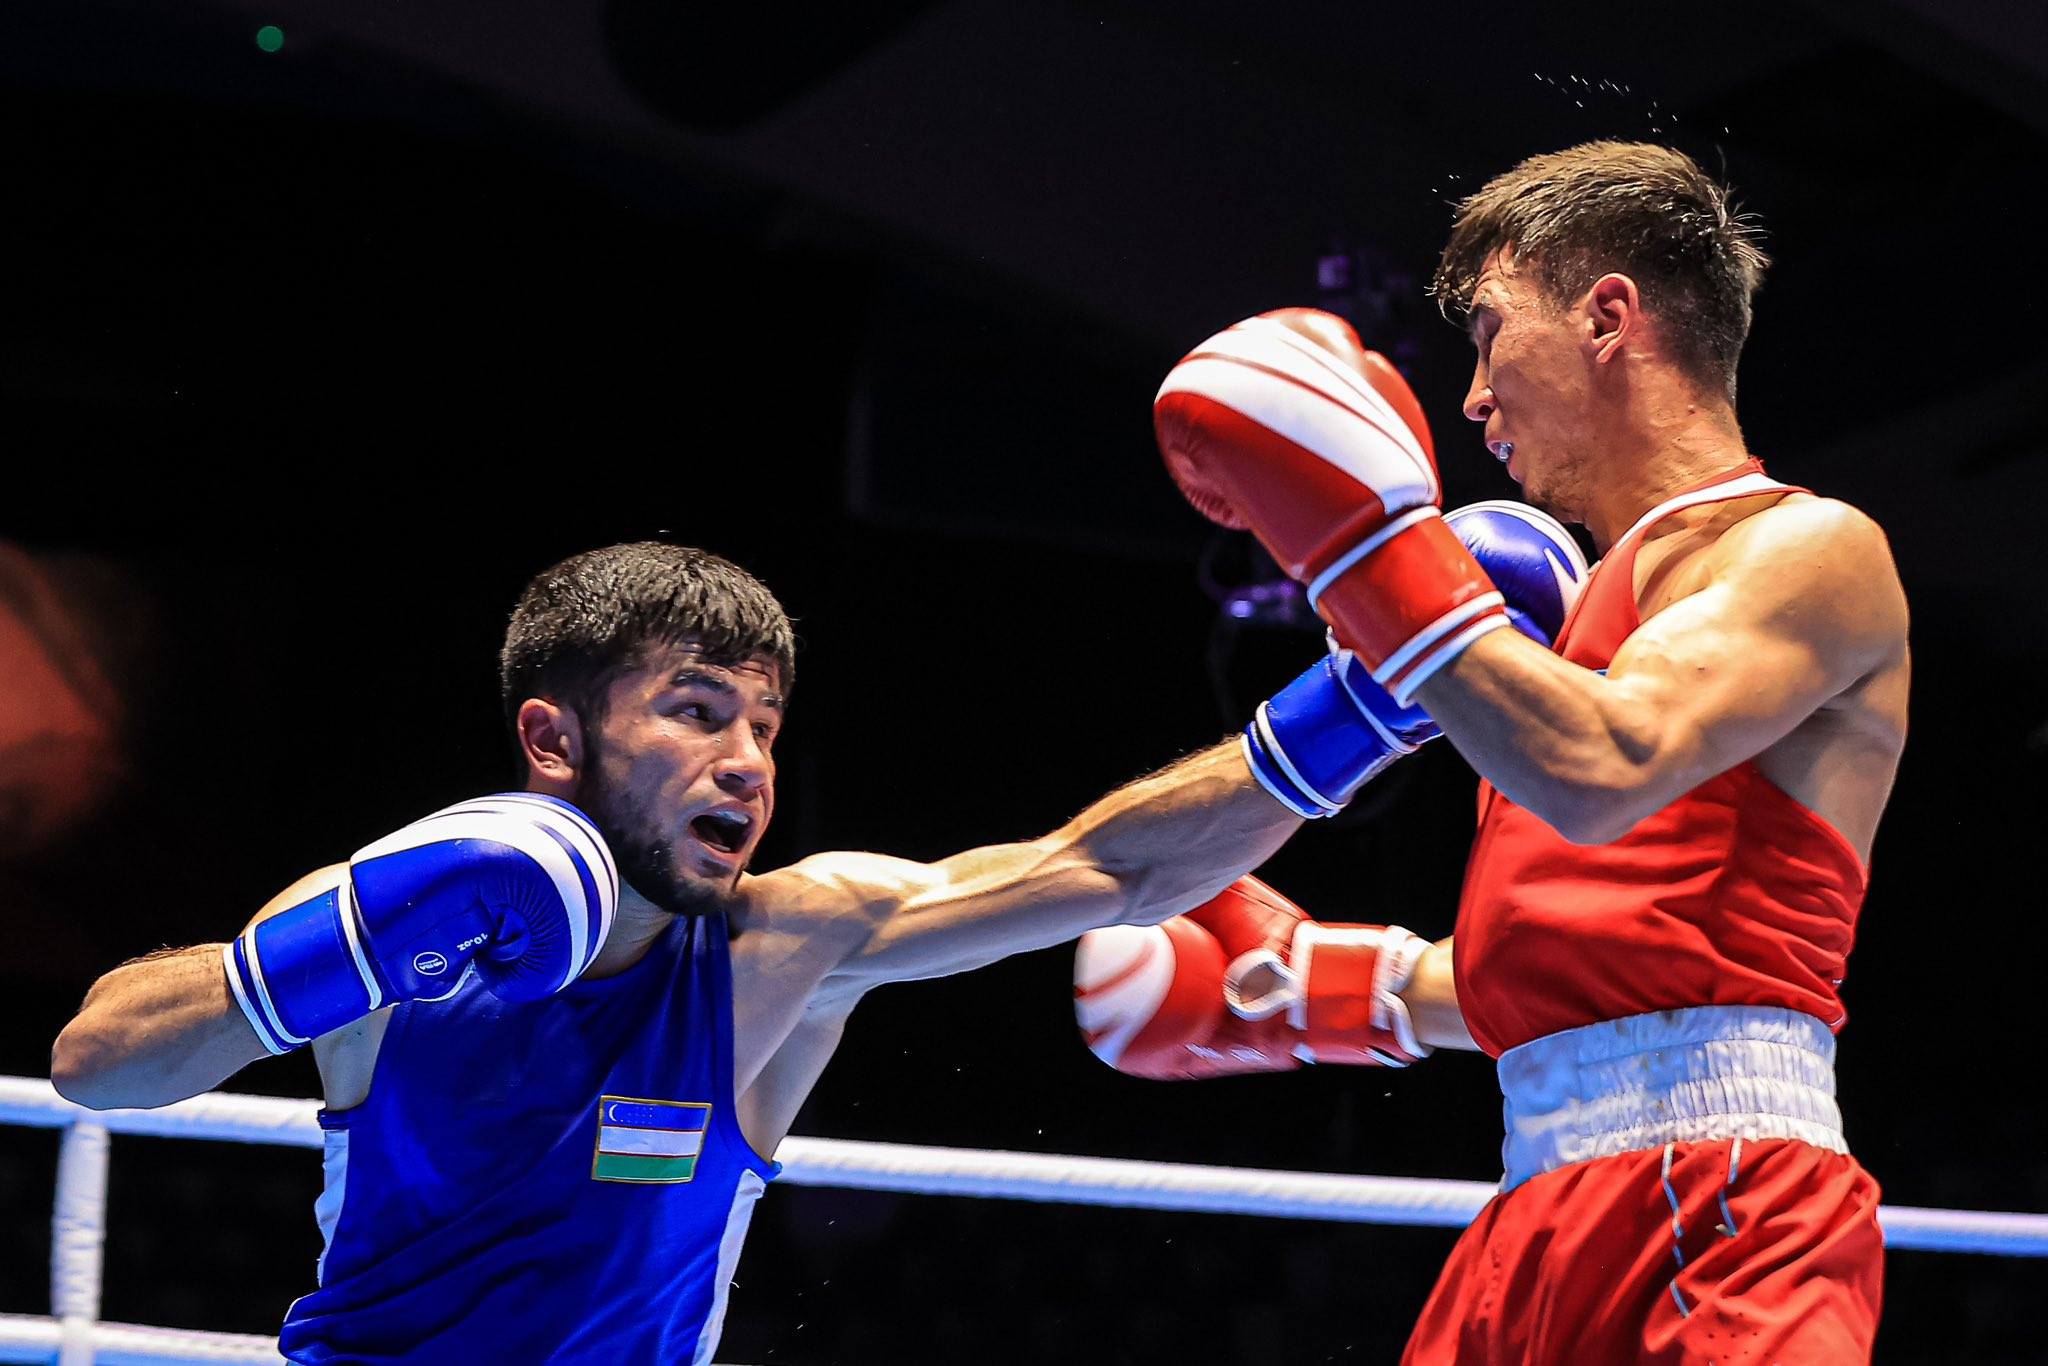 The International Boxing Association has lifted a ban on competitors with beards ©IBA